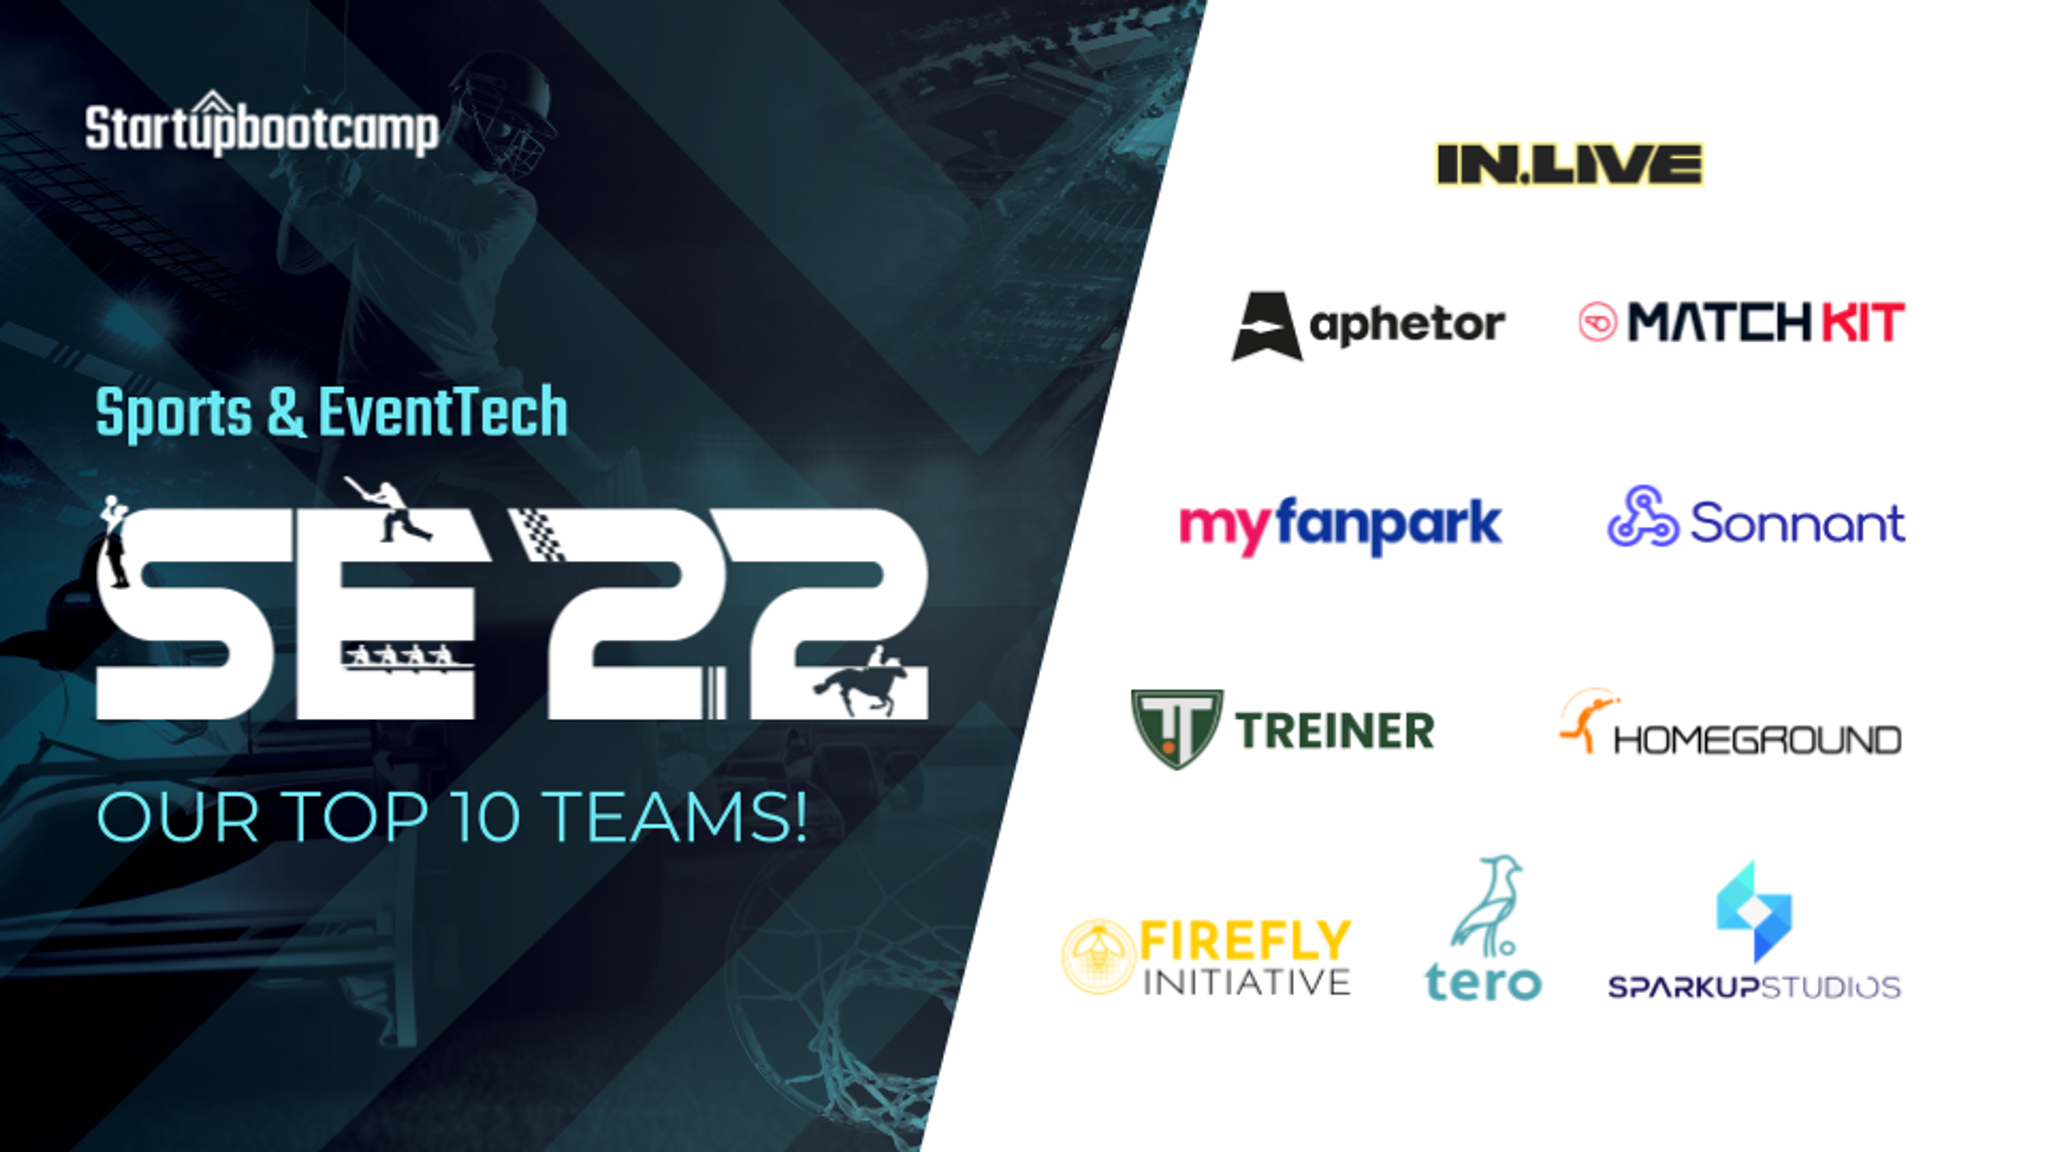 Meet the 9 best early stage Sport & EventTech startups from around the world. 